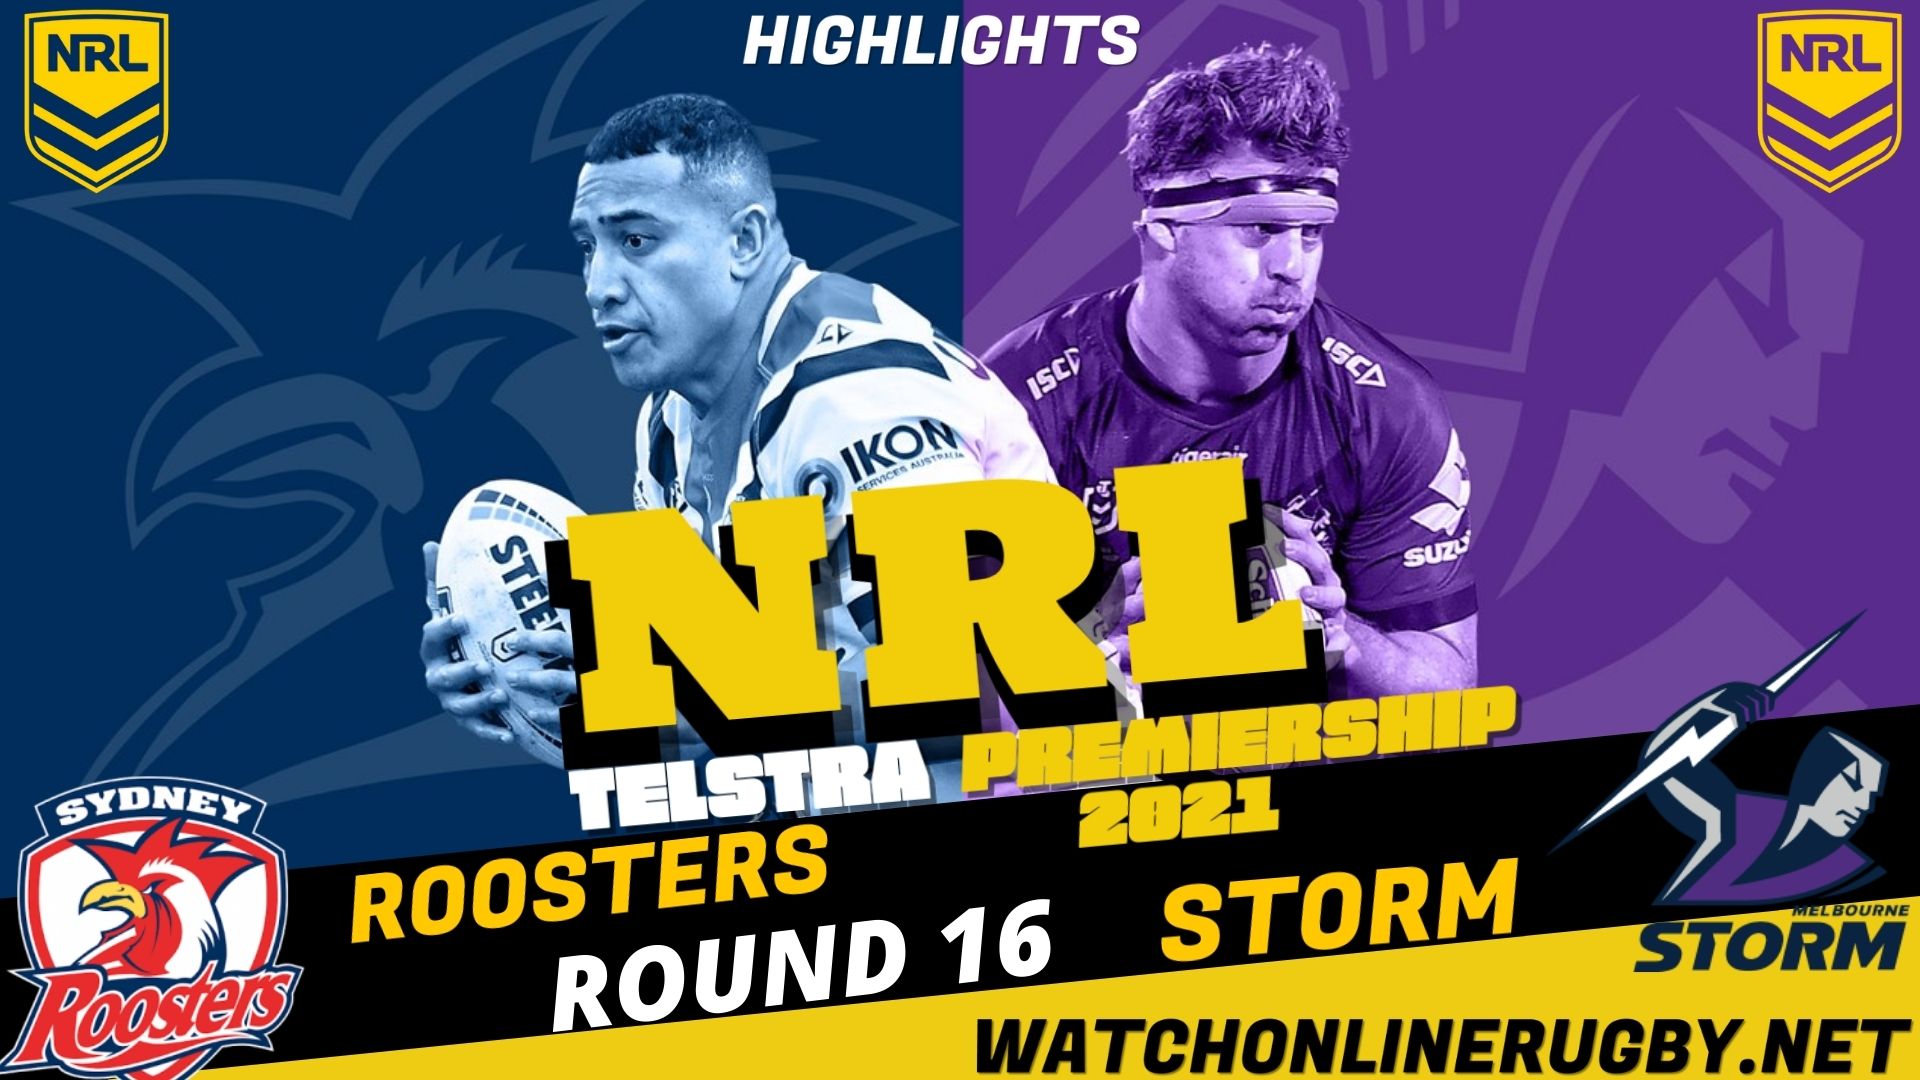 Roosters Vs Storm Highlights RD 16 NRL Rugby